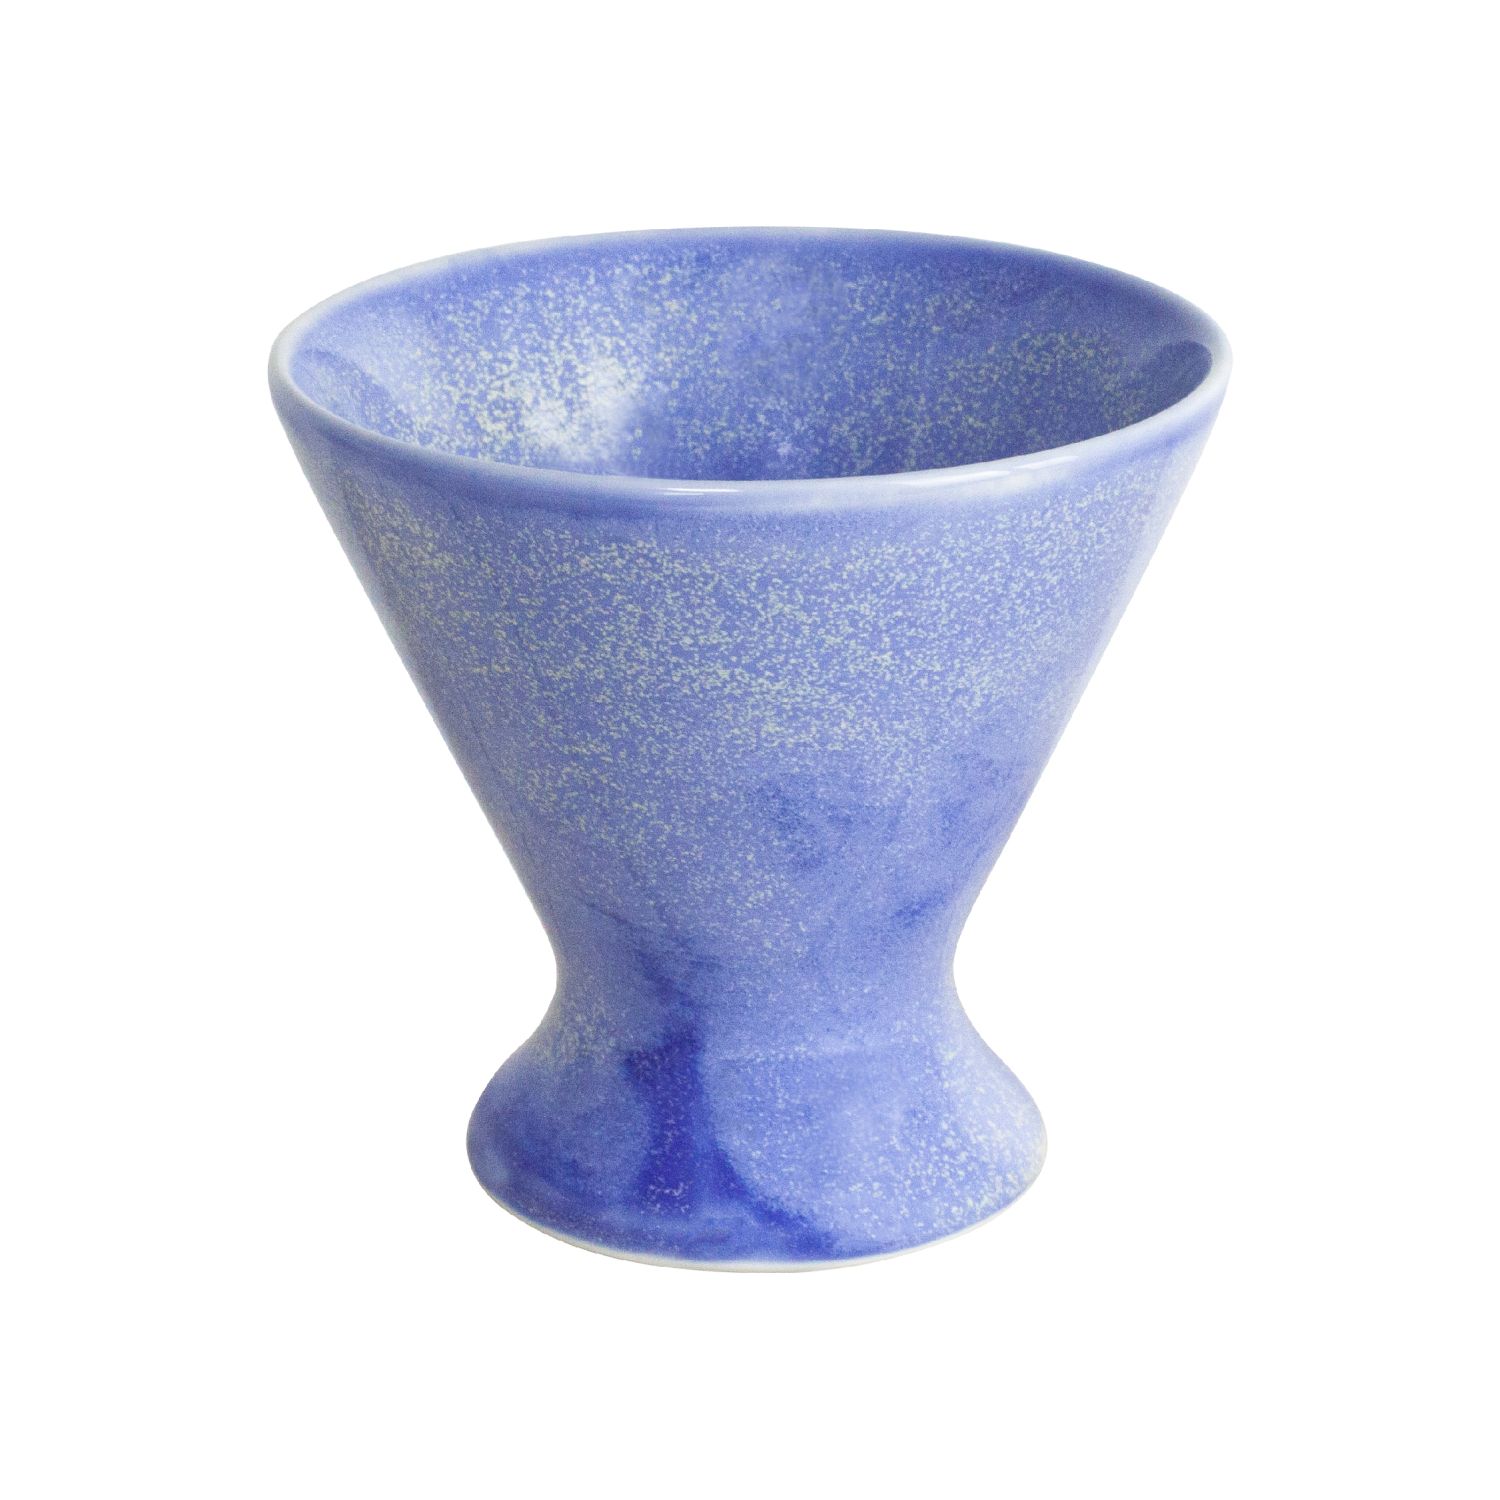 Bomi Choi: Dessert Bowl Blue Product Image 1 of 2